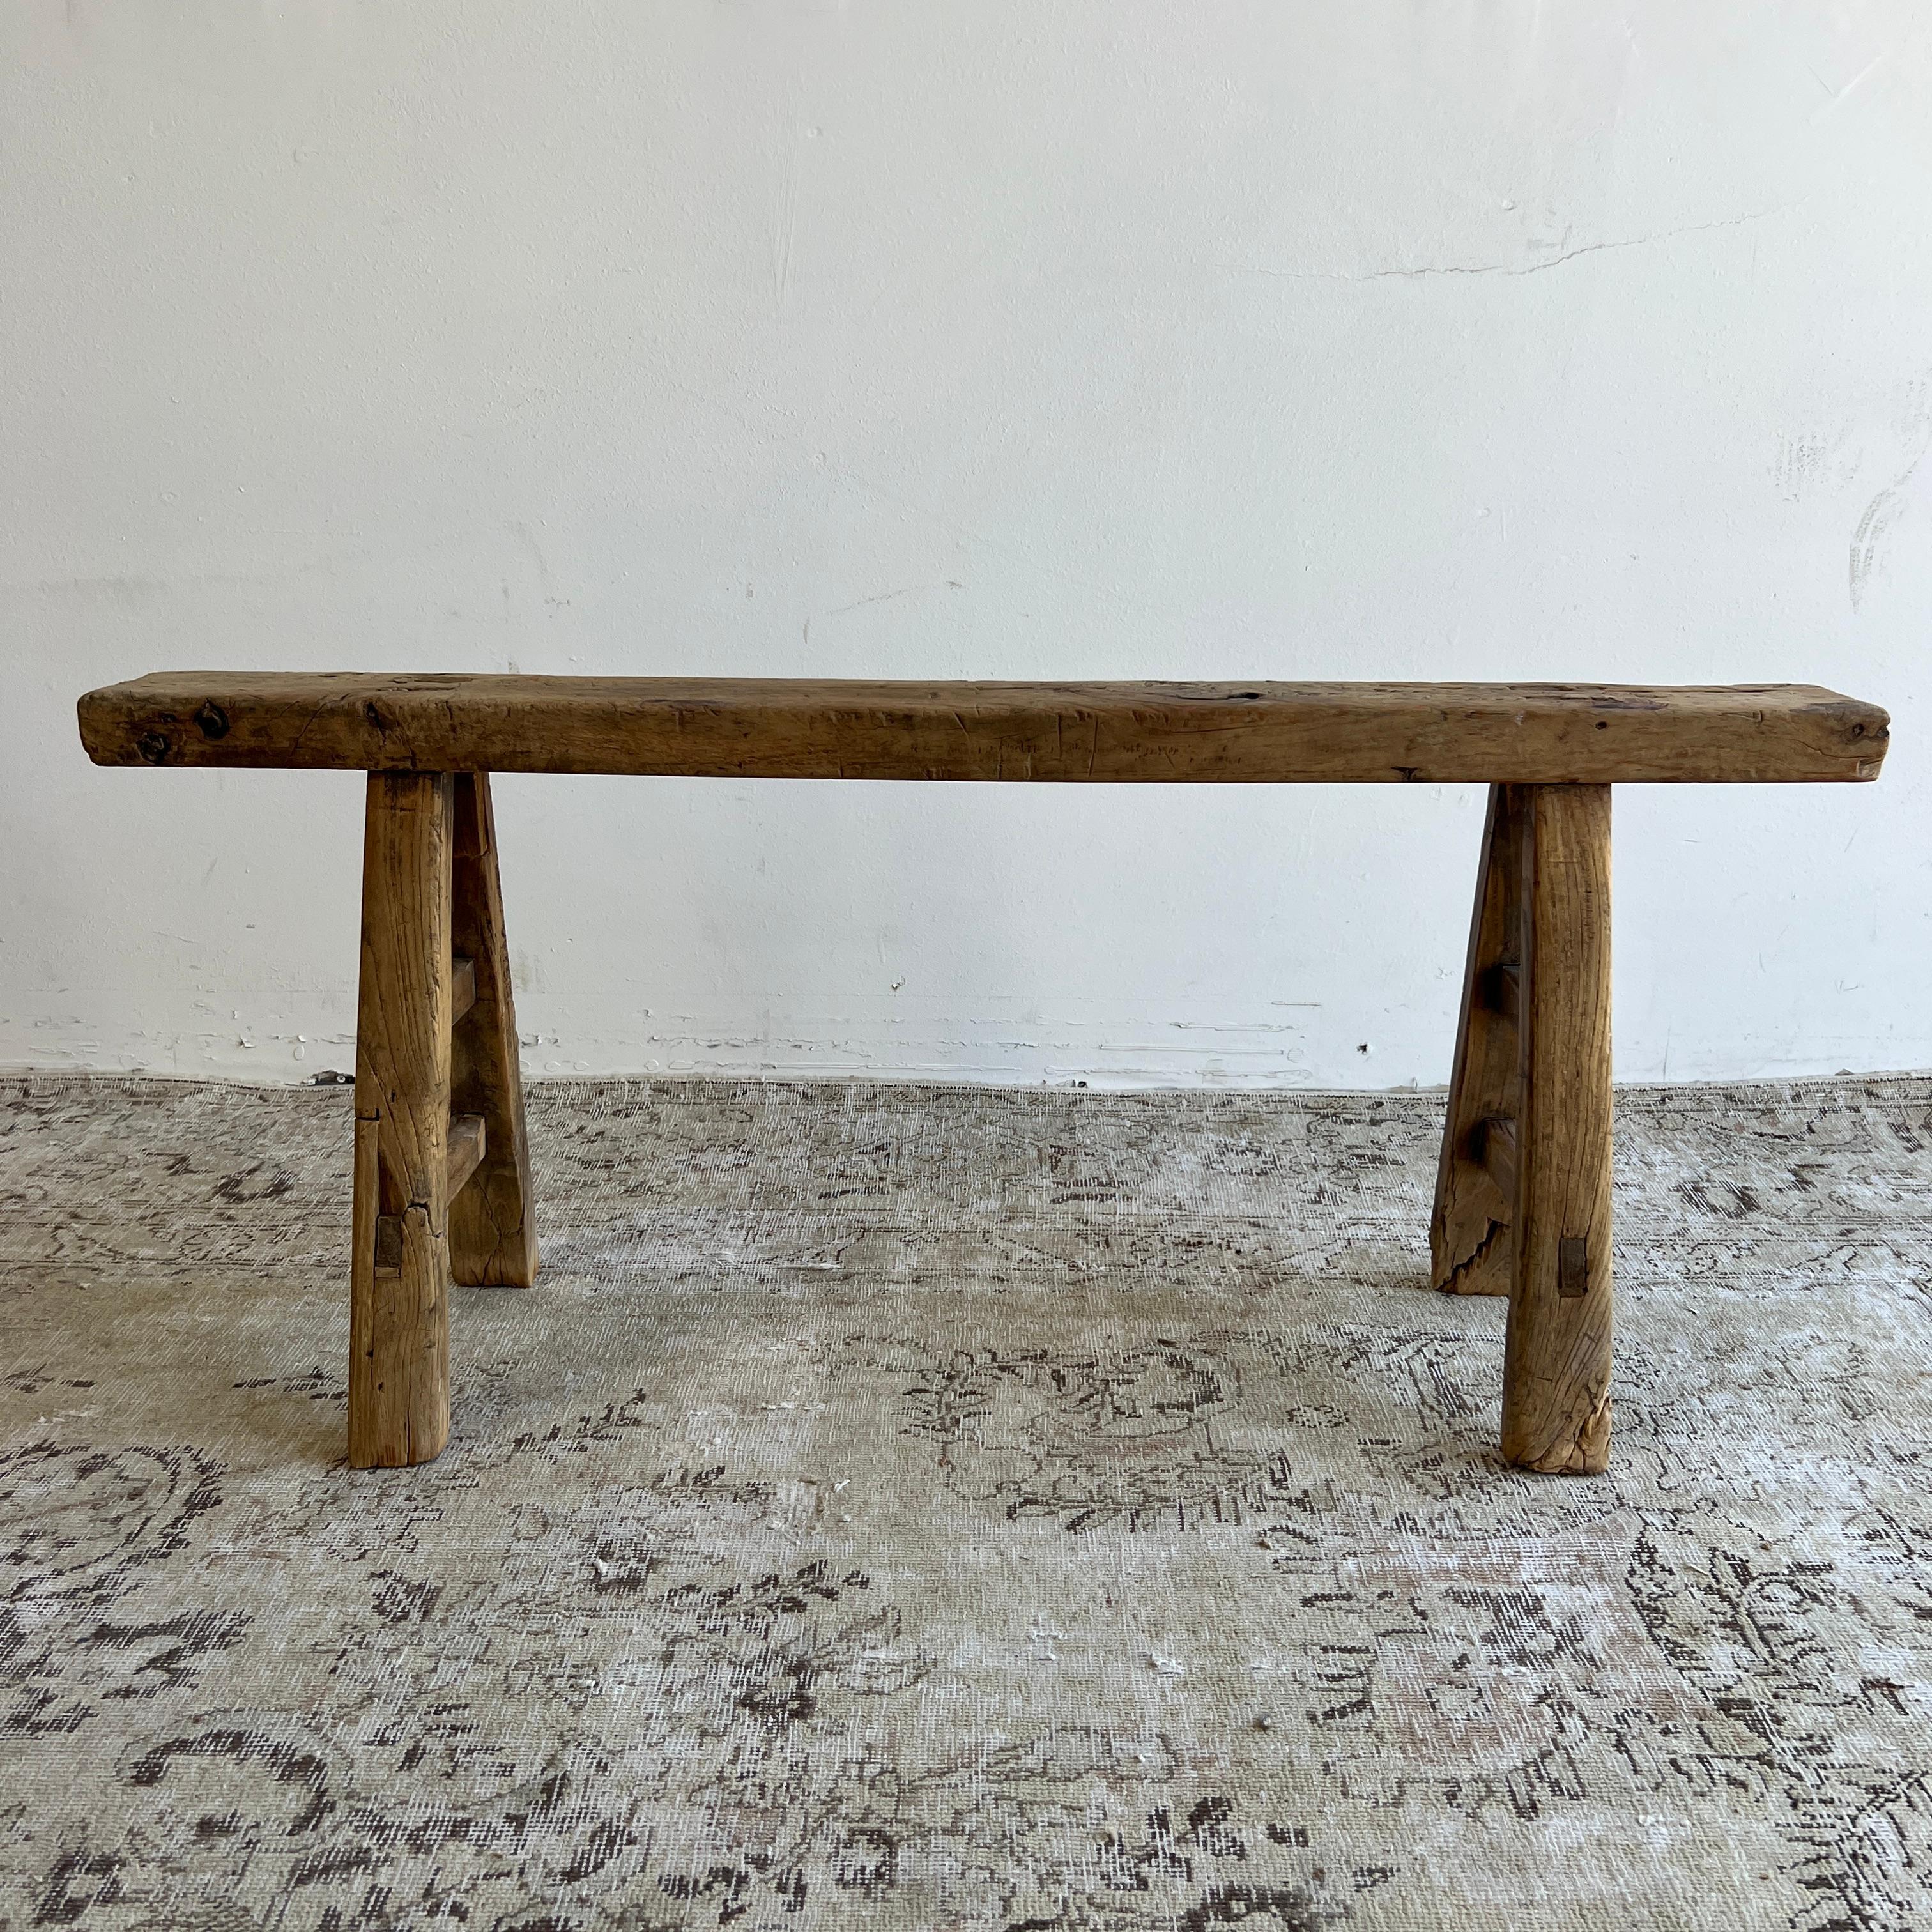 Vintage Antique elm wood bench
These are the real vintage antique elm wood benches! Beautiful antique patina, with weathering and age, these are solid and sturdy ready for daily use, use as as a table behind a sofa, stool, coffee table, they are